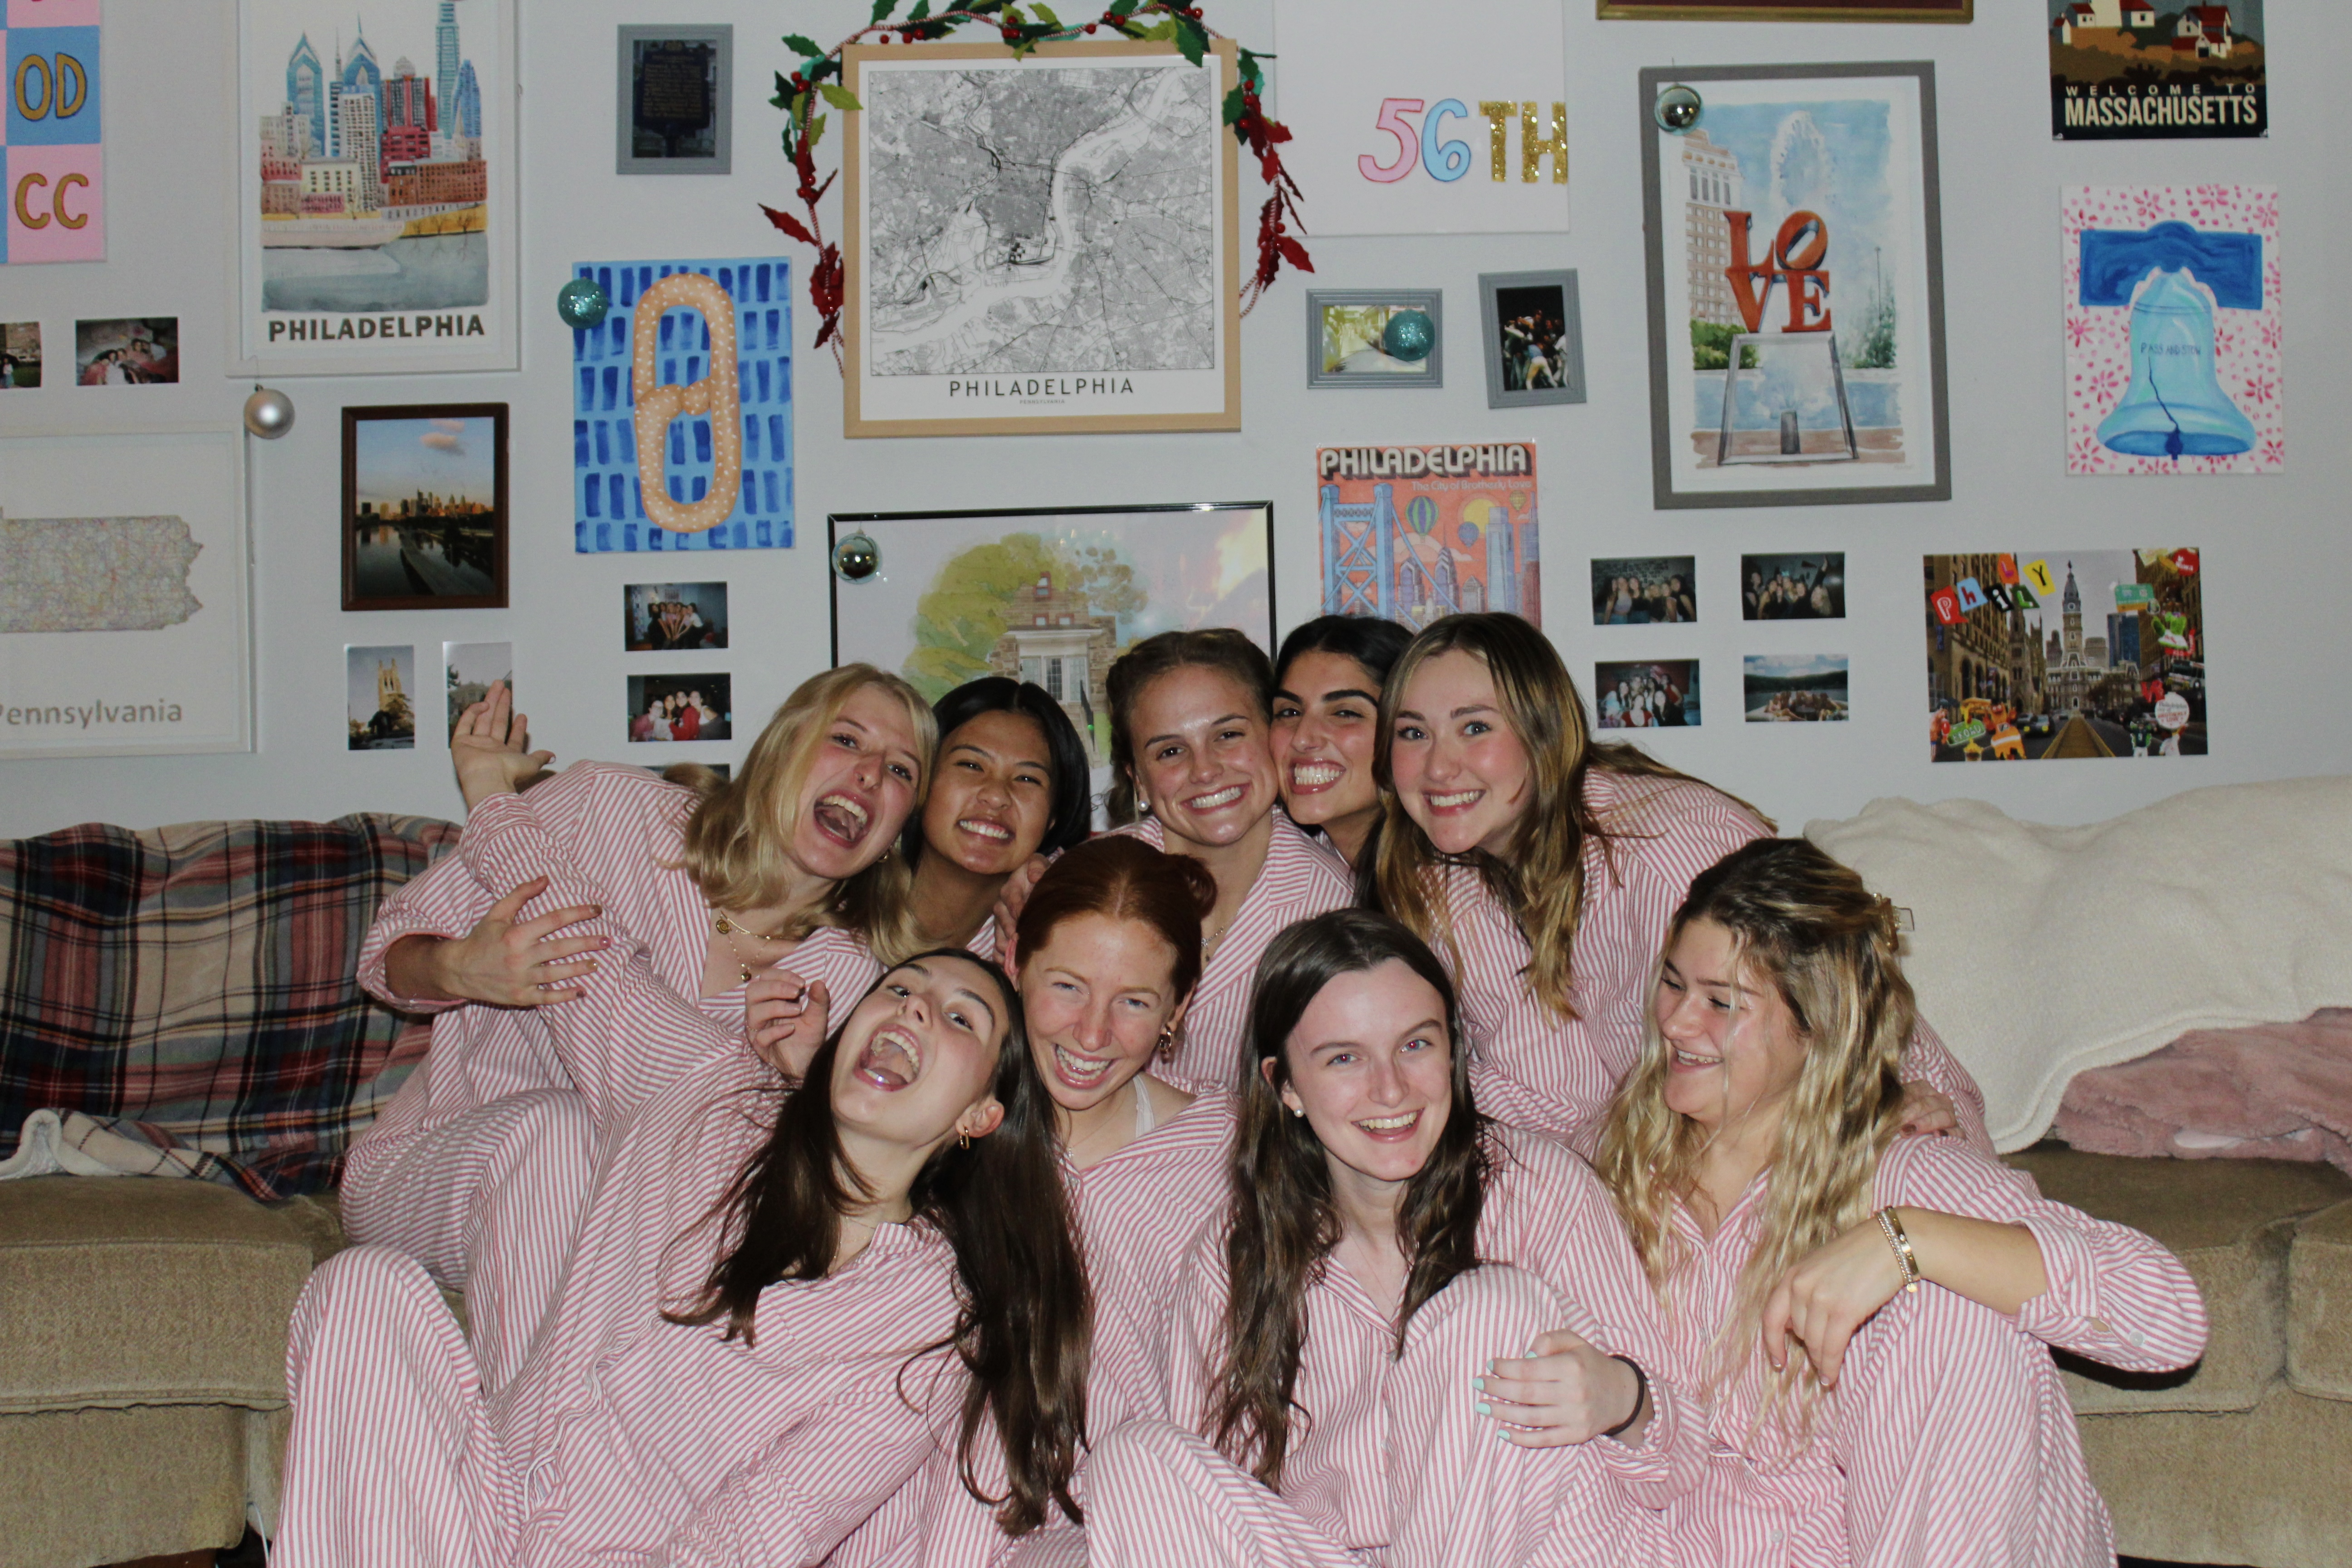 This image depicts a group of 9 girls all wearing striped christmas pajamas sitting on a big beige couch. The wall behind them has a variety of artworks and photos in frames.